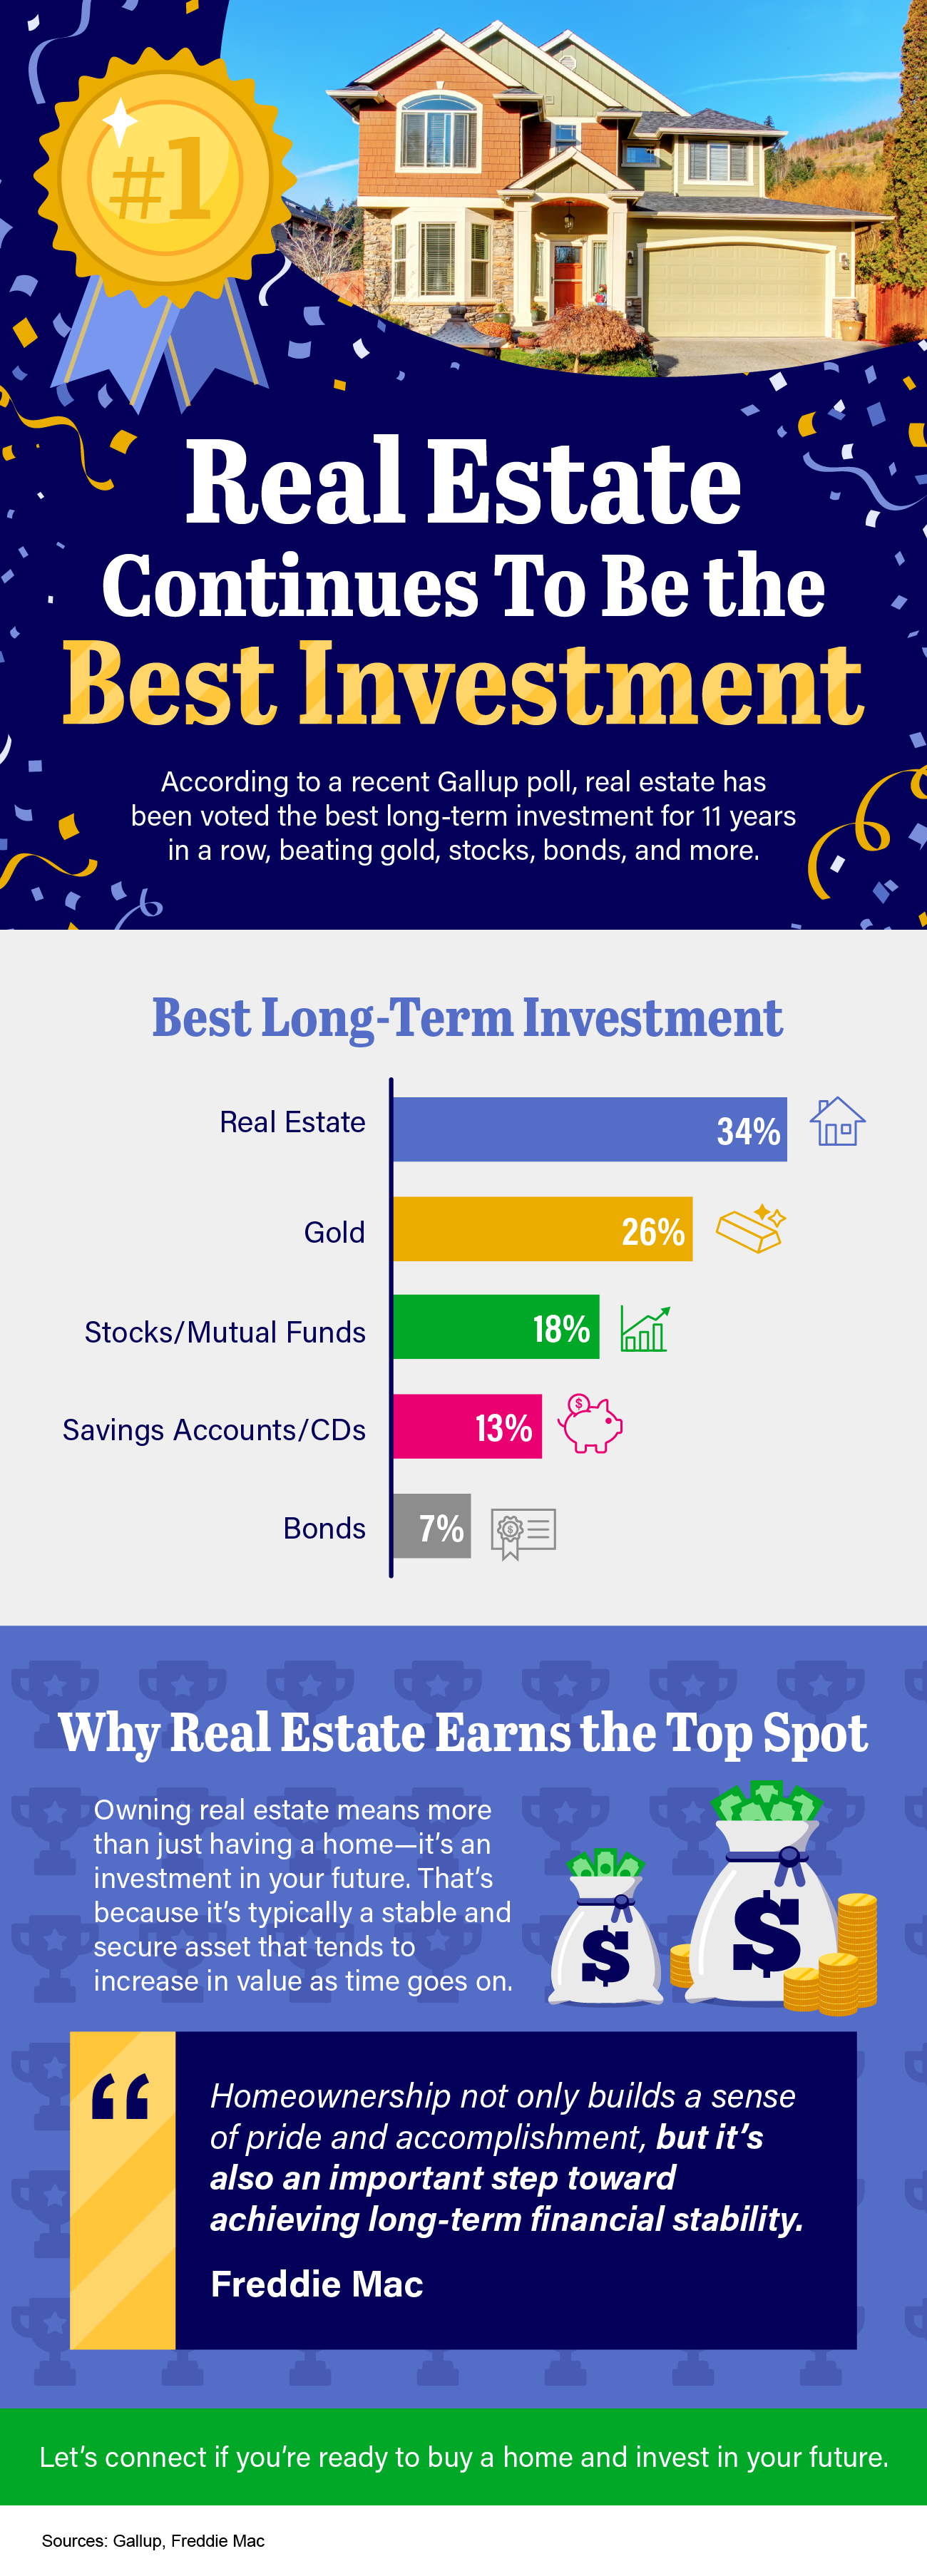 Real Estate Continues To Be the Best Investment - KM Realty Group LLC, Chicago